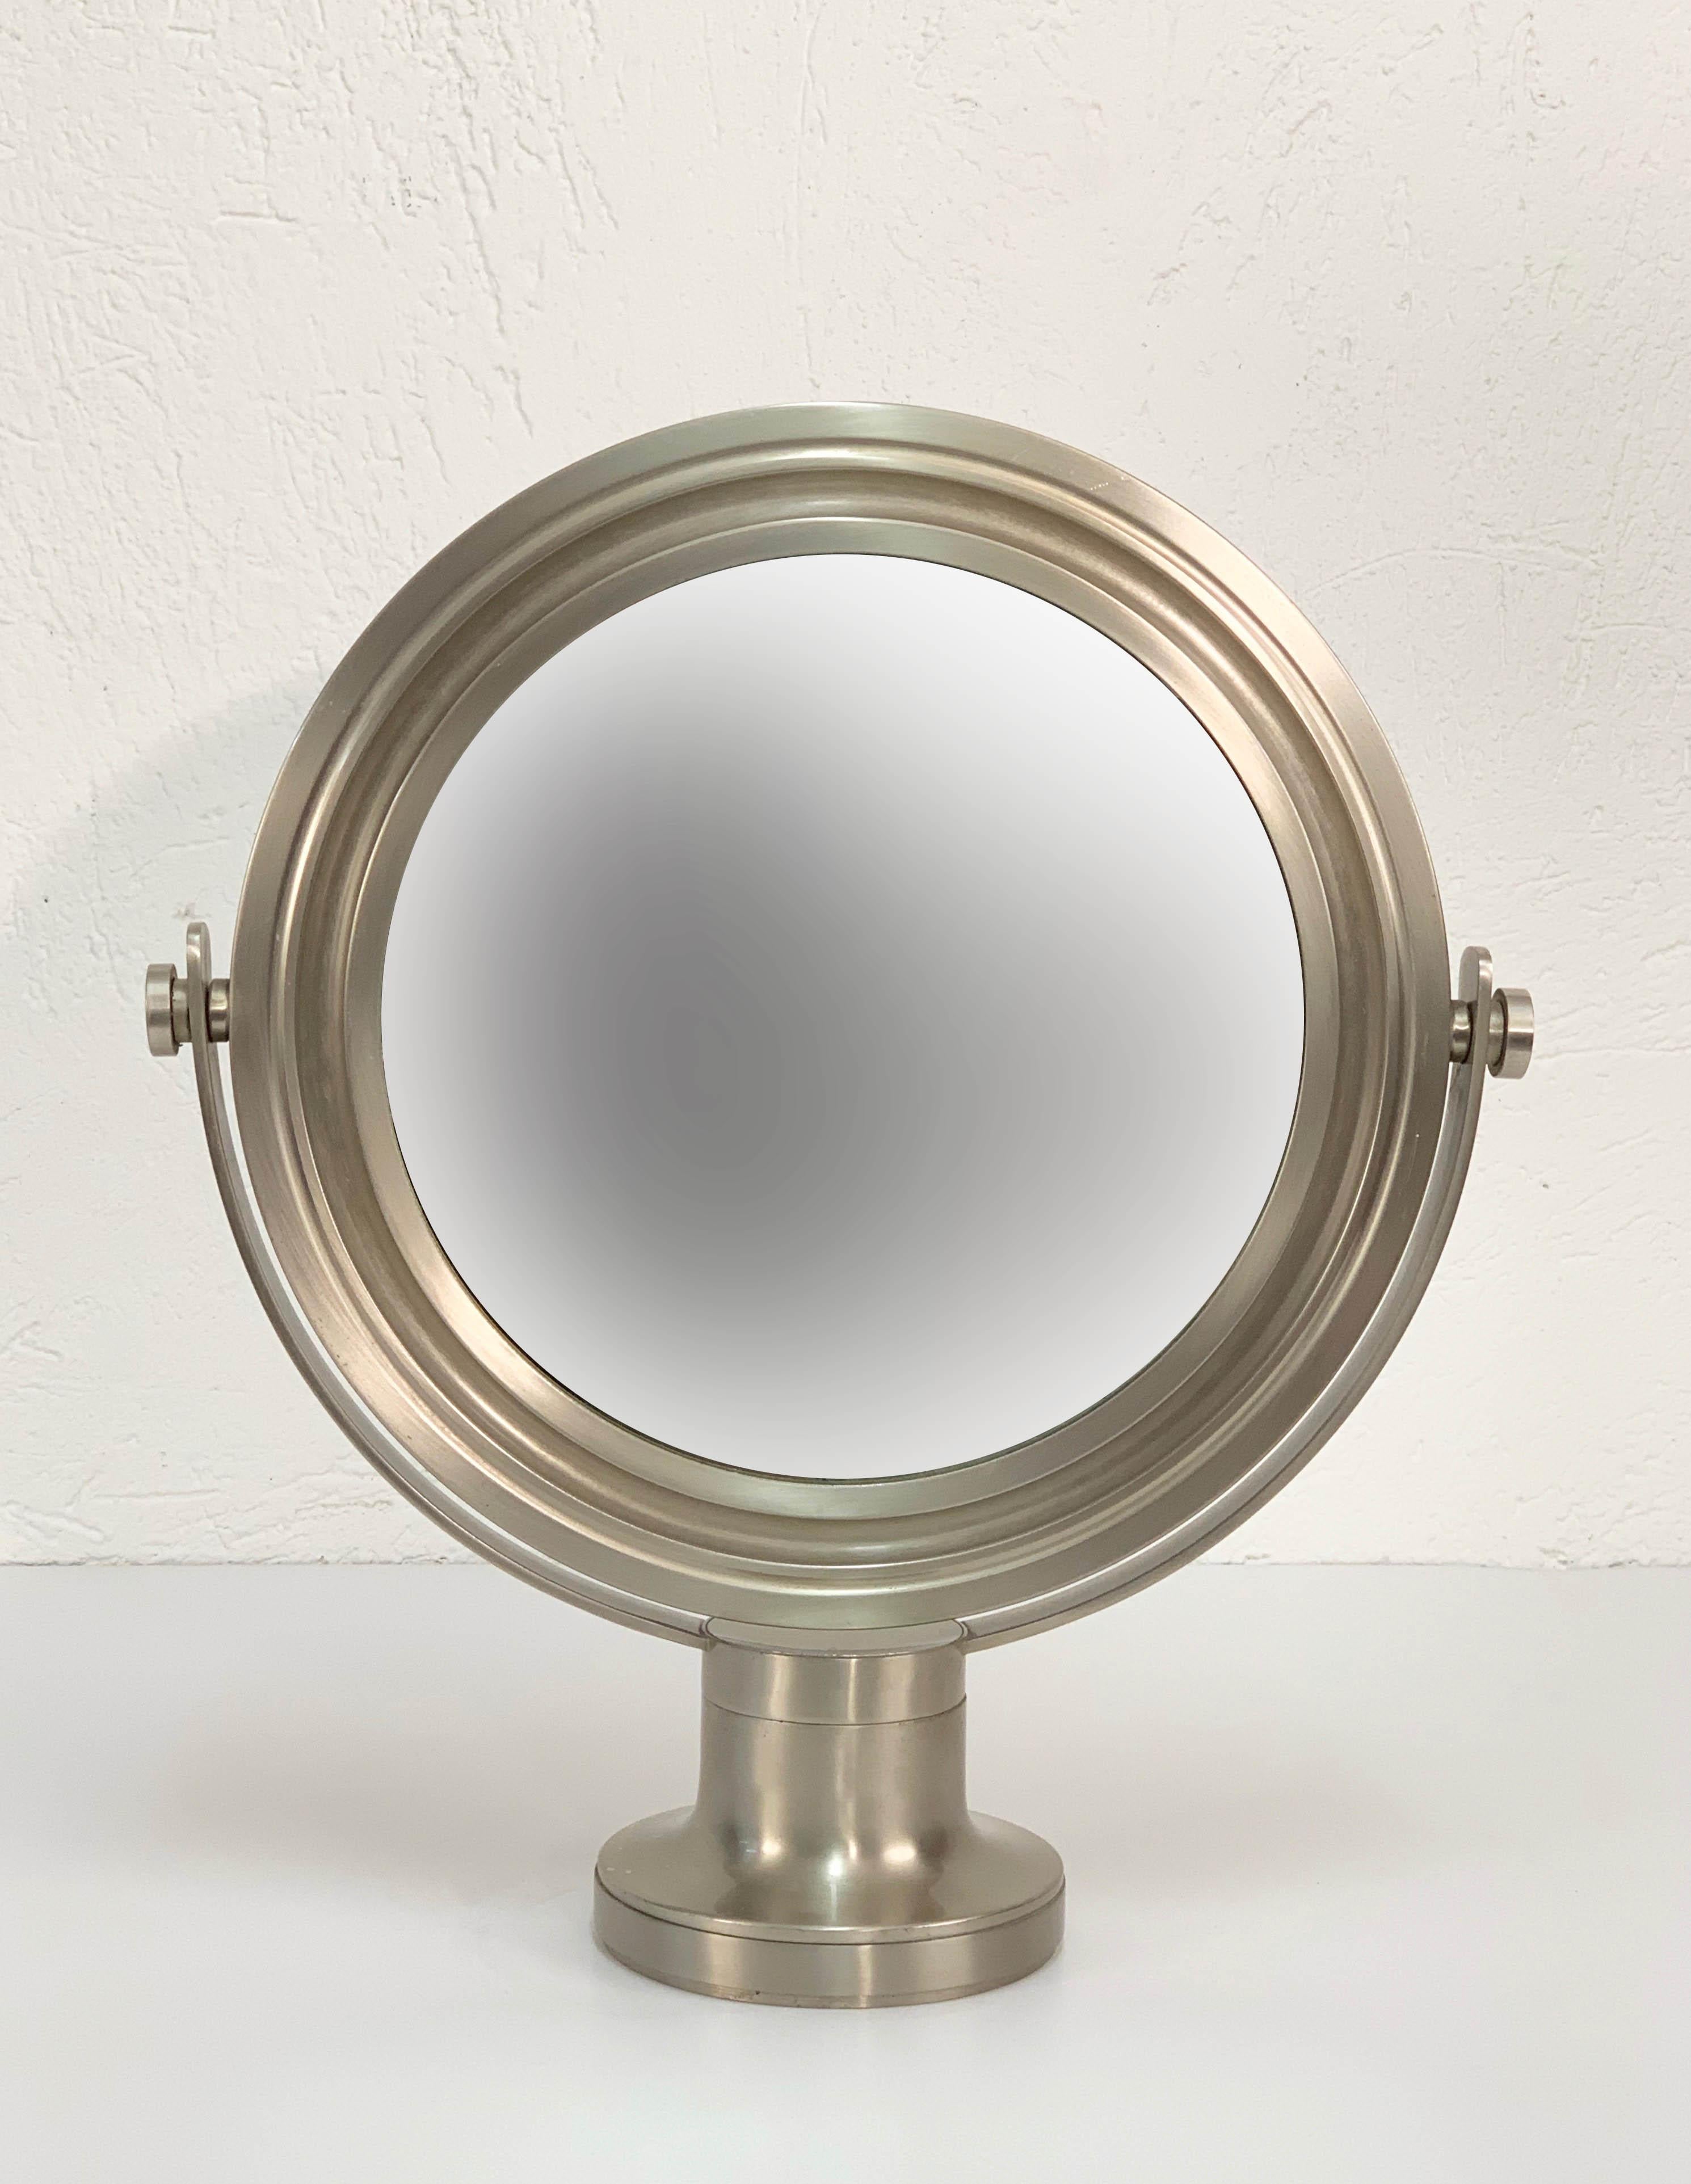 Sergio Mazza midcentury table mirror in brass and nickel for Artemide, produced in Italy during 1960s.

This astonishing piece is composed of a revolving nickel-plated and sterilized brass mirror on a small base. The condition is excellent as the